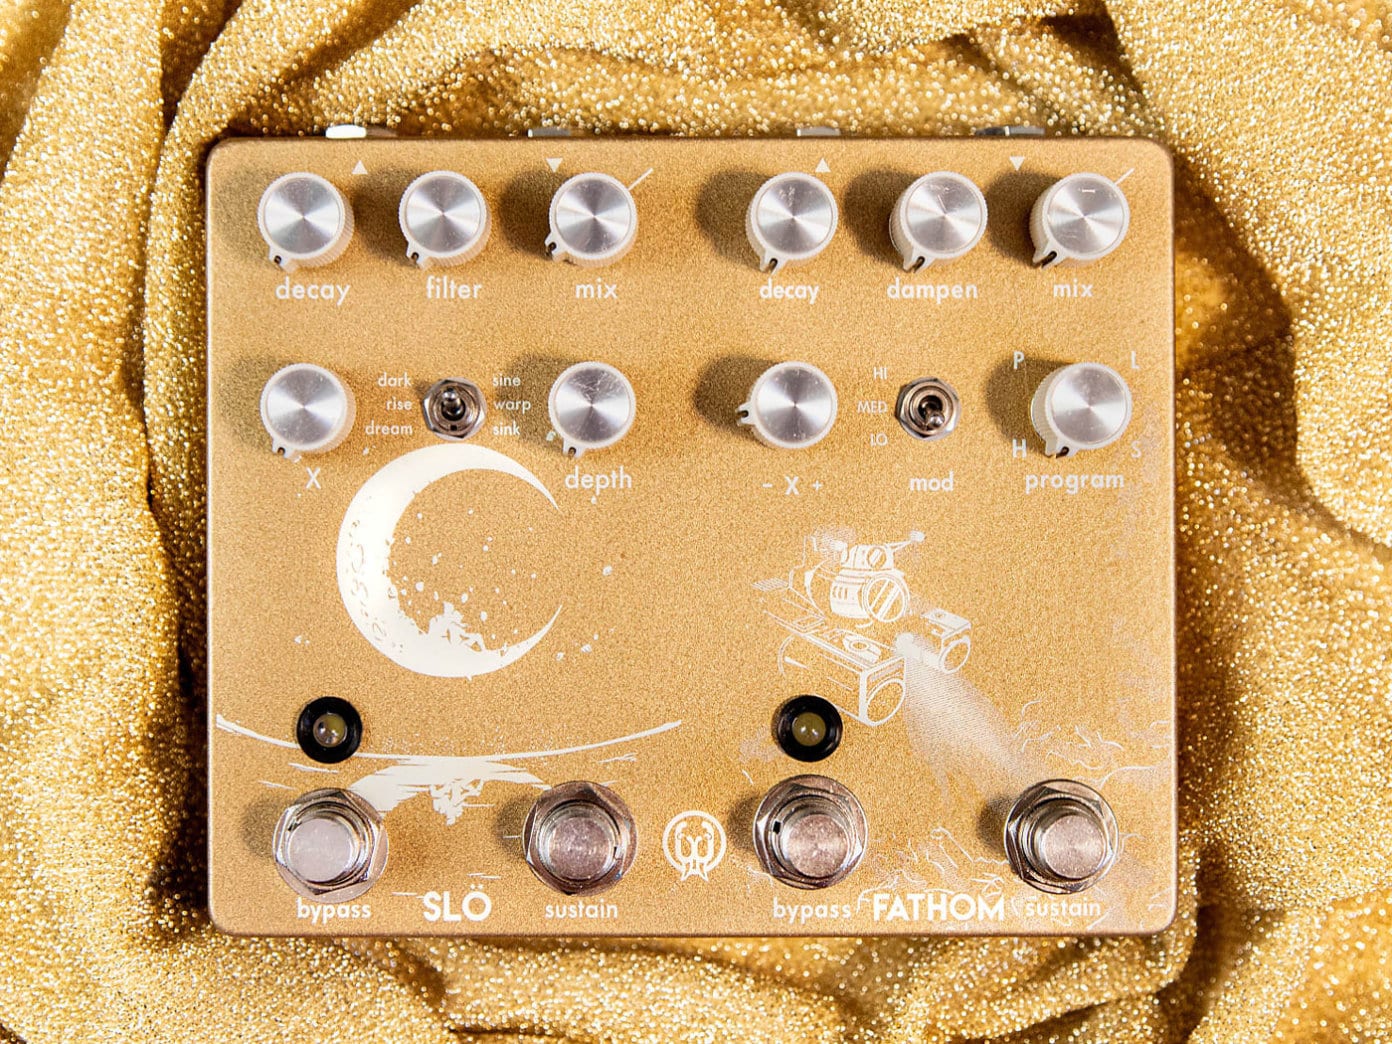 Walrus Audio combines the Slö and Fathom pedals into one gold pedal